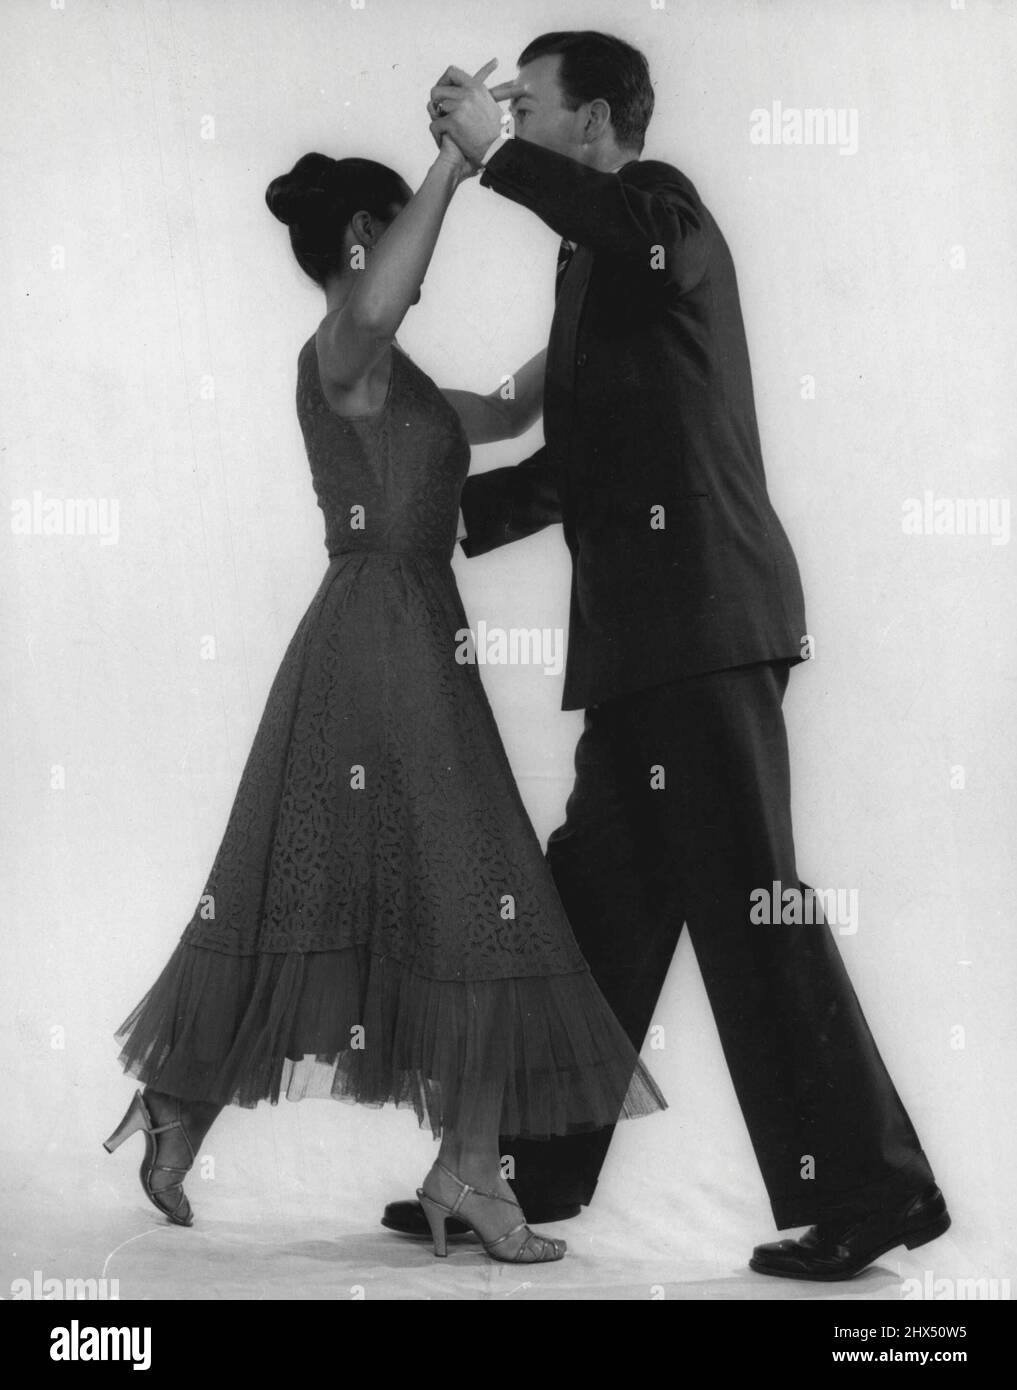 First Step -- Man moves forward with his right foot. Girl moves left foot back. (Each step counts as slow step, i.e. two beats). April 25, 1955. Stock Photo